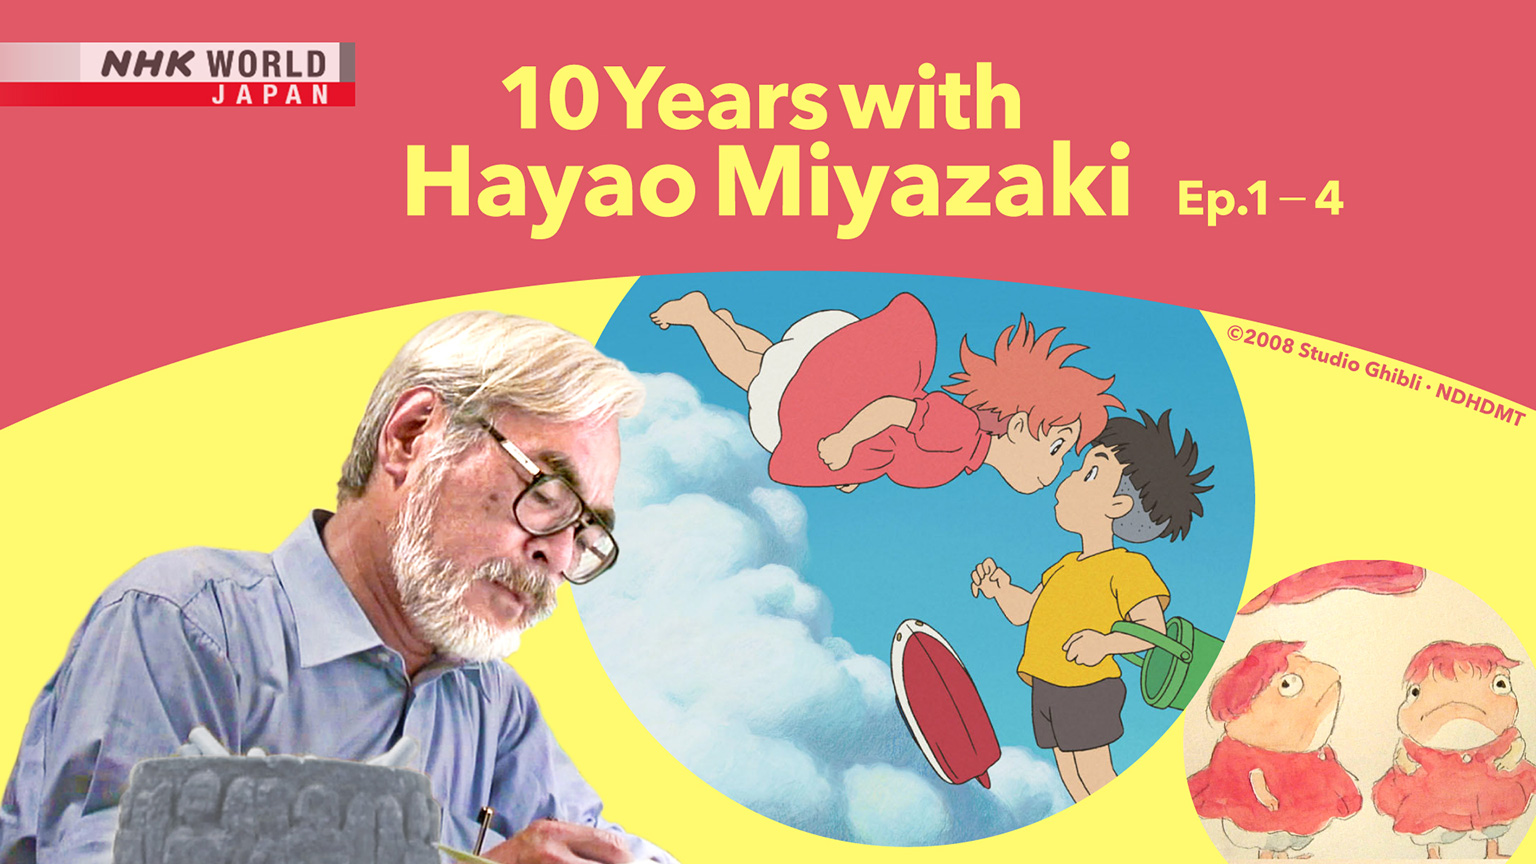 An exclusive, behind-the-scenes look at the genius of Japan's foremost living film director, Hayao Miyazaki -- creator of some of the world's most ico